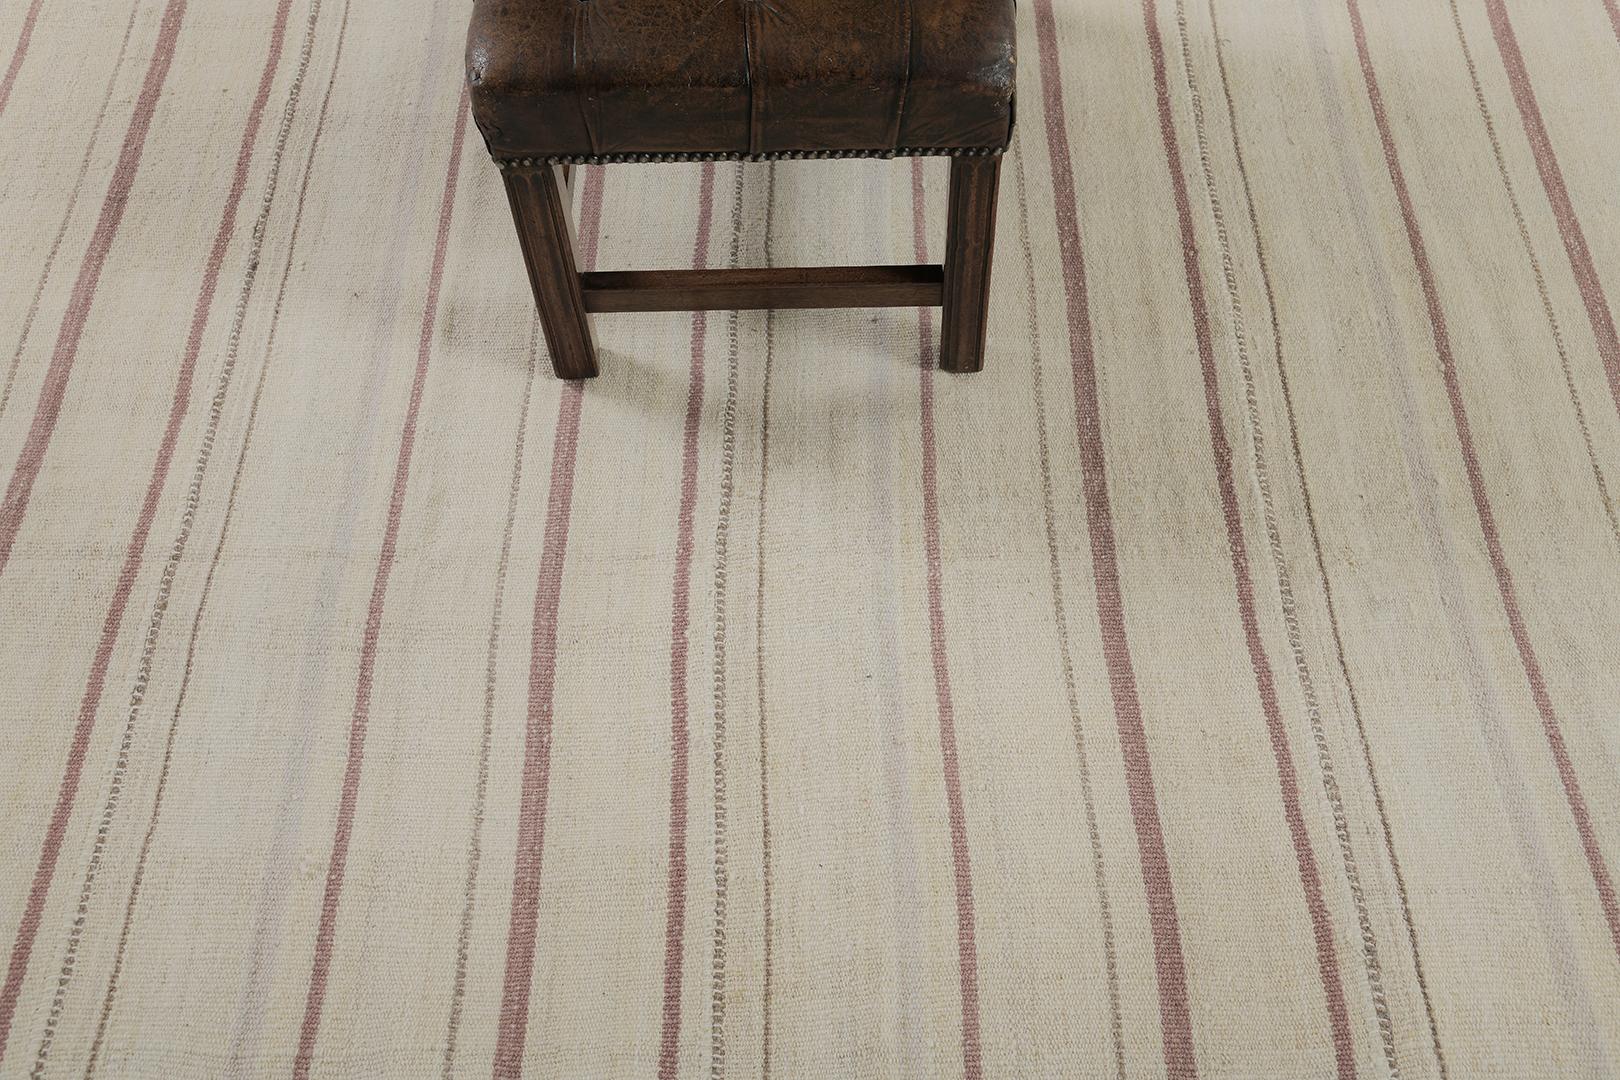 Stunning neutral flatweave wool is flexible in every interior you might get into. This Persian Jejim Kilim has umber brown stripes to redefine your classy and chic interiors. 

Rug Number 27260
Size 10' 9